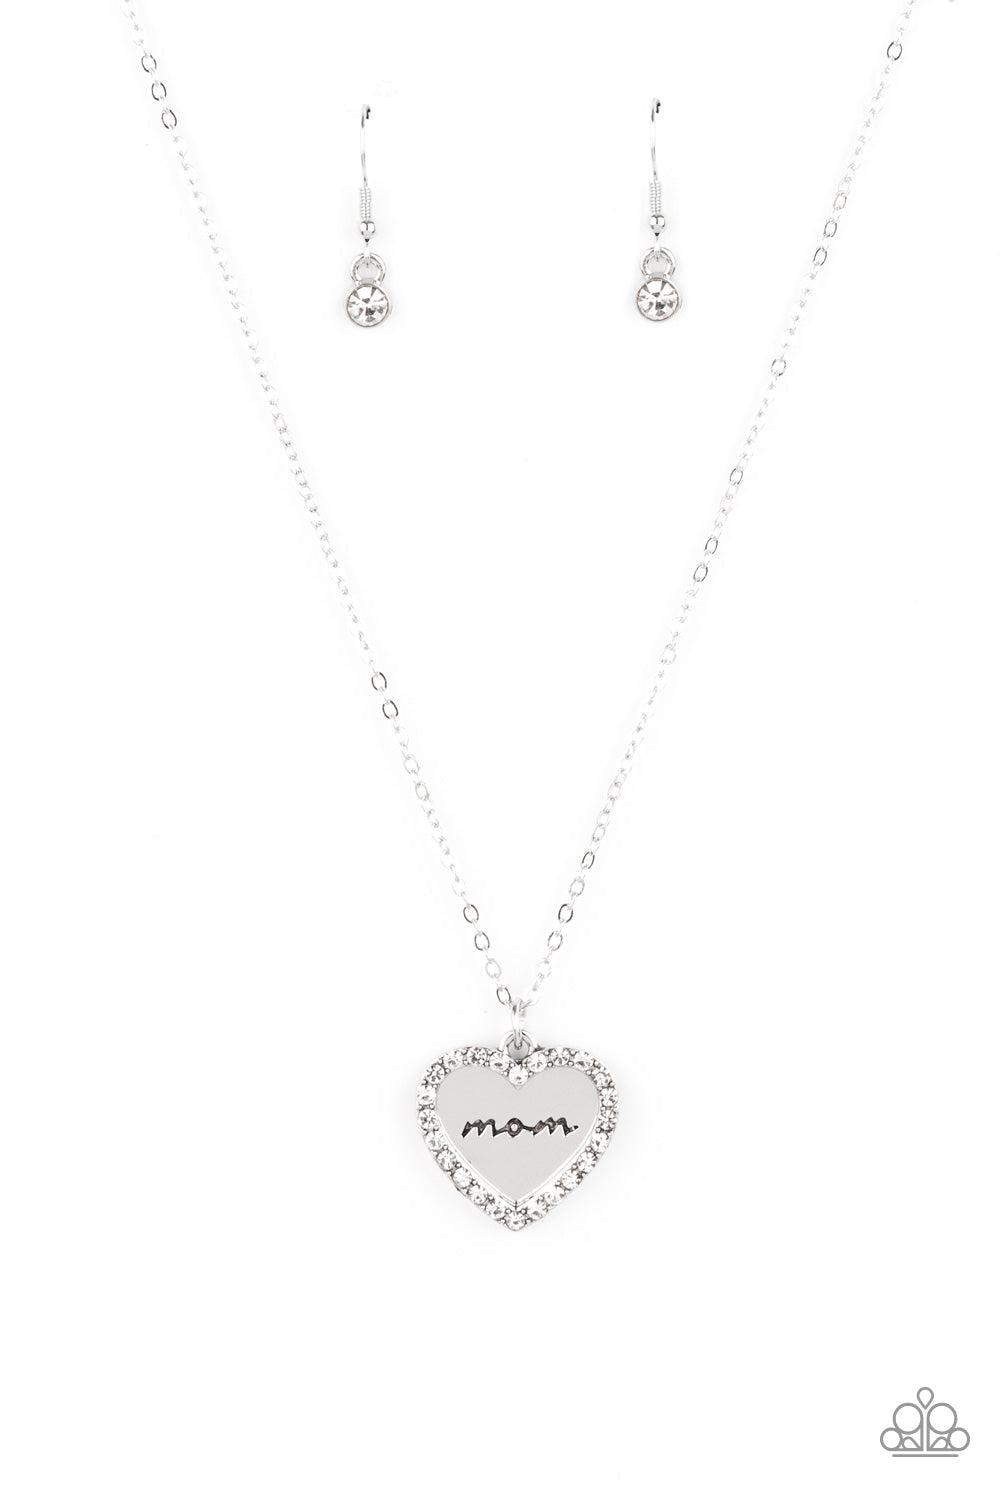 The Real Boss White Rhinestone Heart Necklace - Paparazzi Accessories- lightbox - CarasShop.com - $5 Jewelry by Cara Jewels